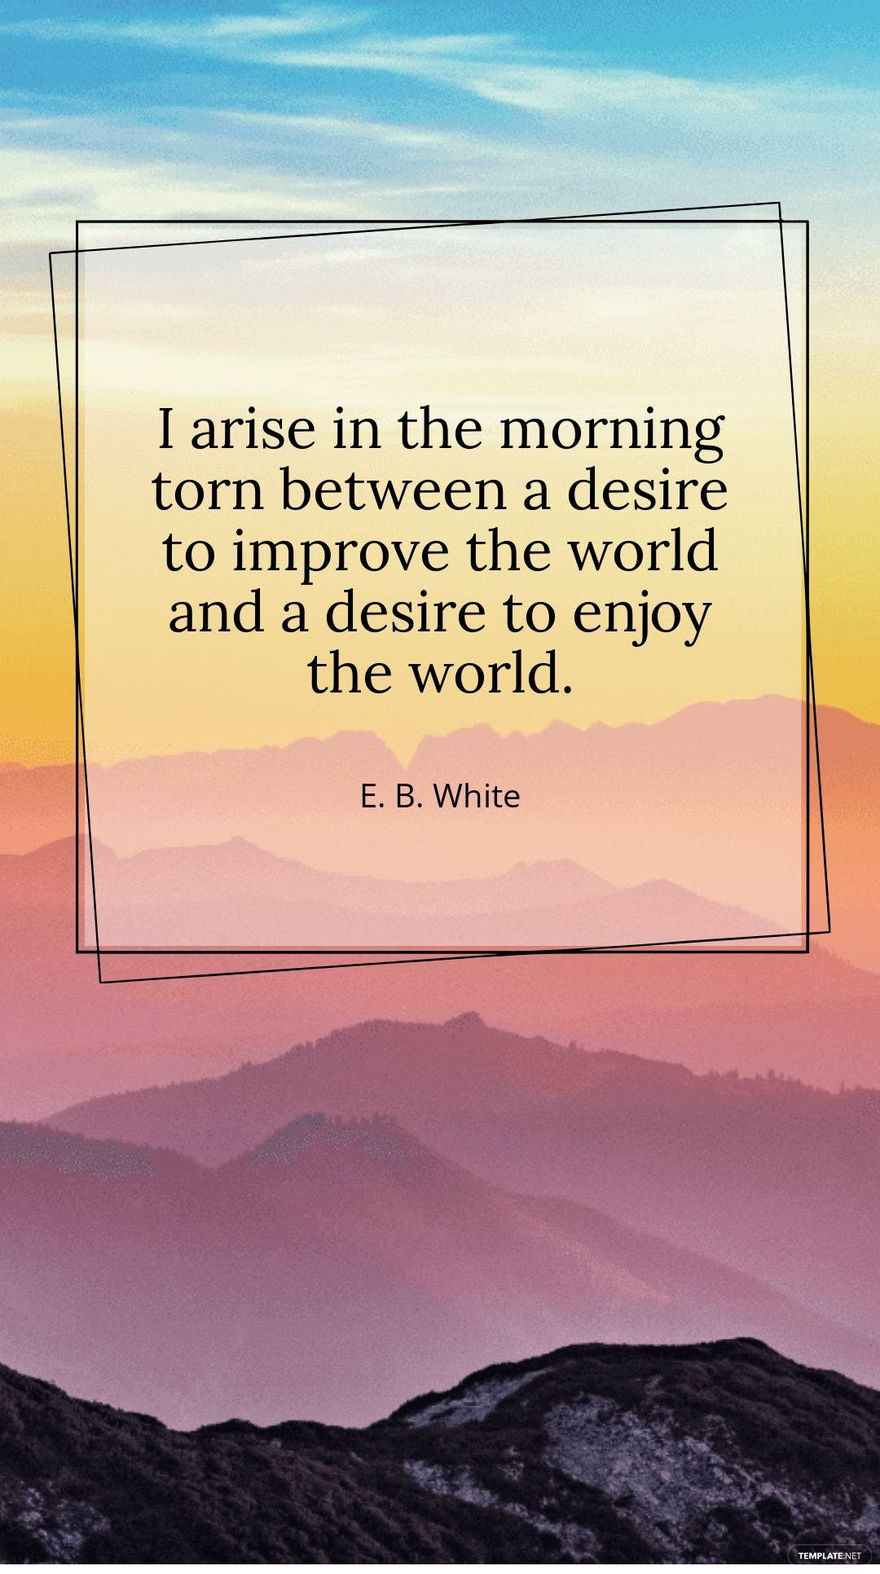 E. B. White - I arise in the morning torn between a desire to improve the world and a desire to enjoy the world.